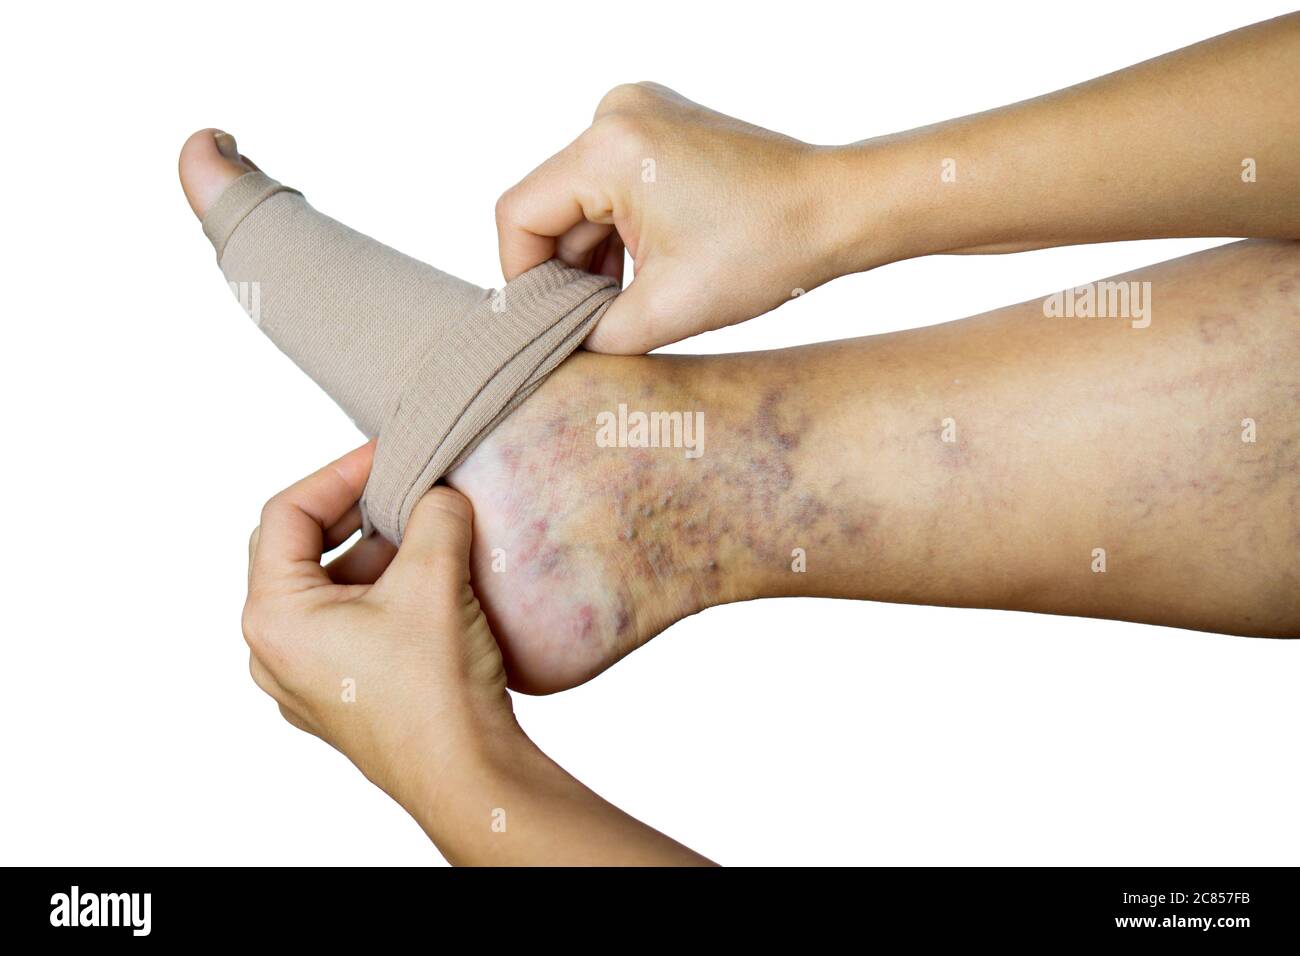 a woman puts a compression stocking on her leg with varicose veins. Varicose veins prevention, Compression tights, relief for tired legs. female legs Stock Photo